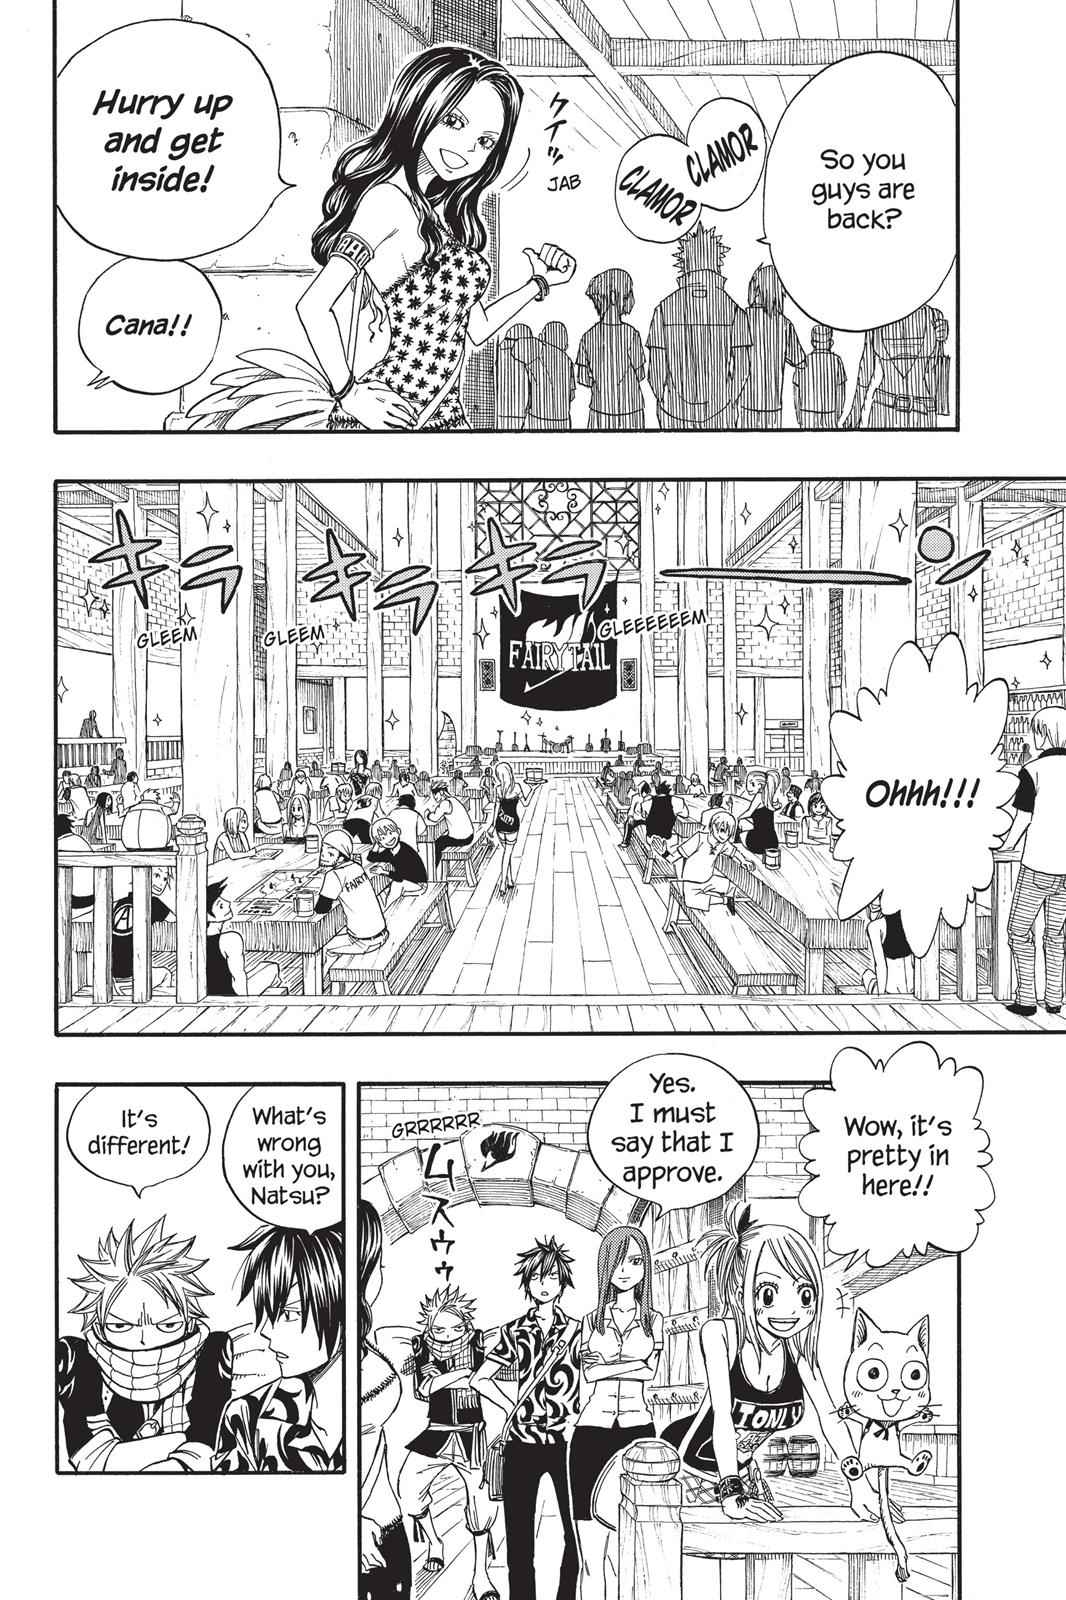  Chapter 103 image 005